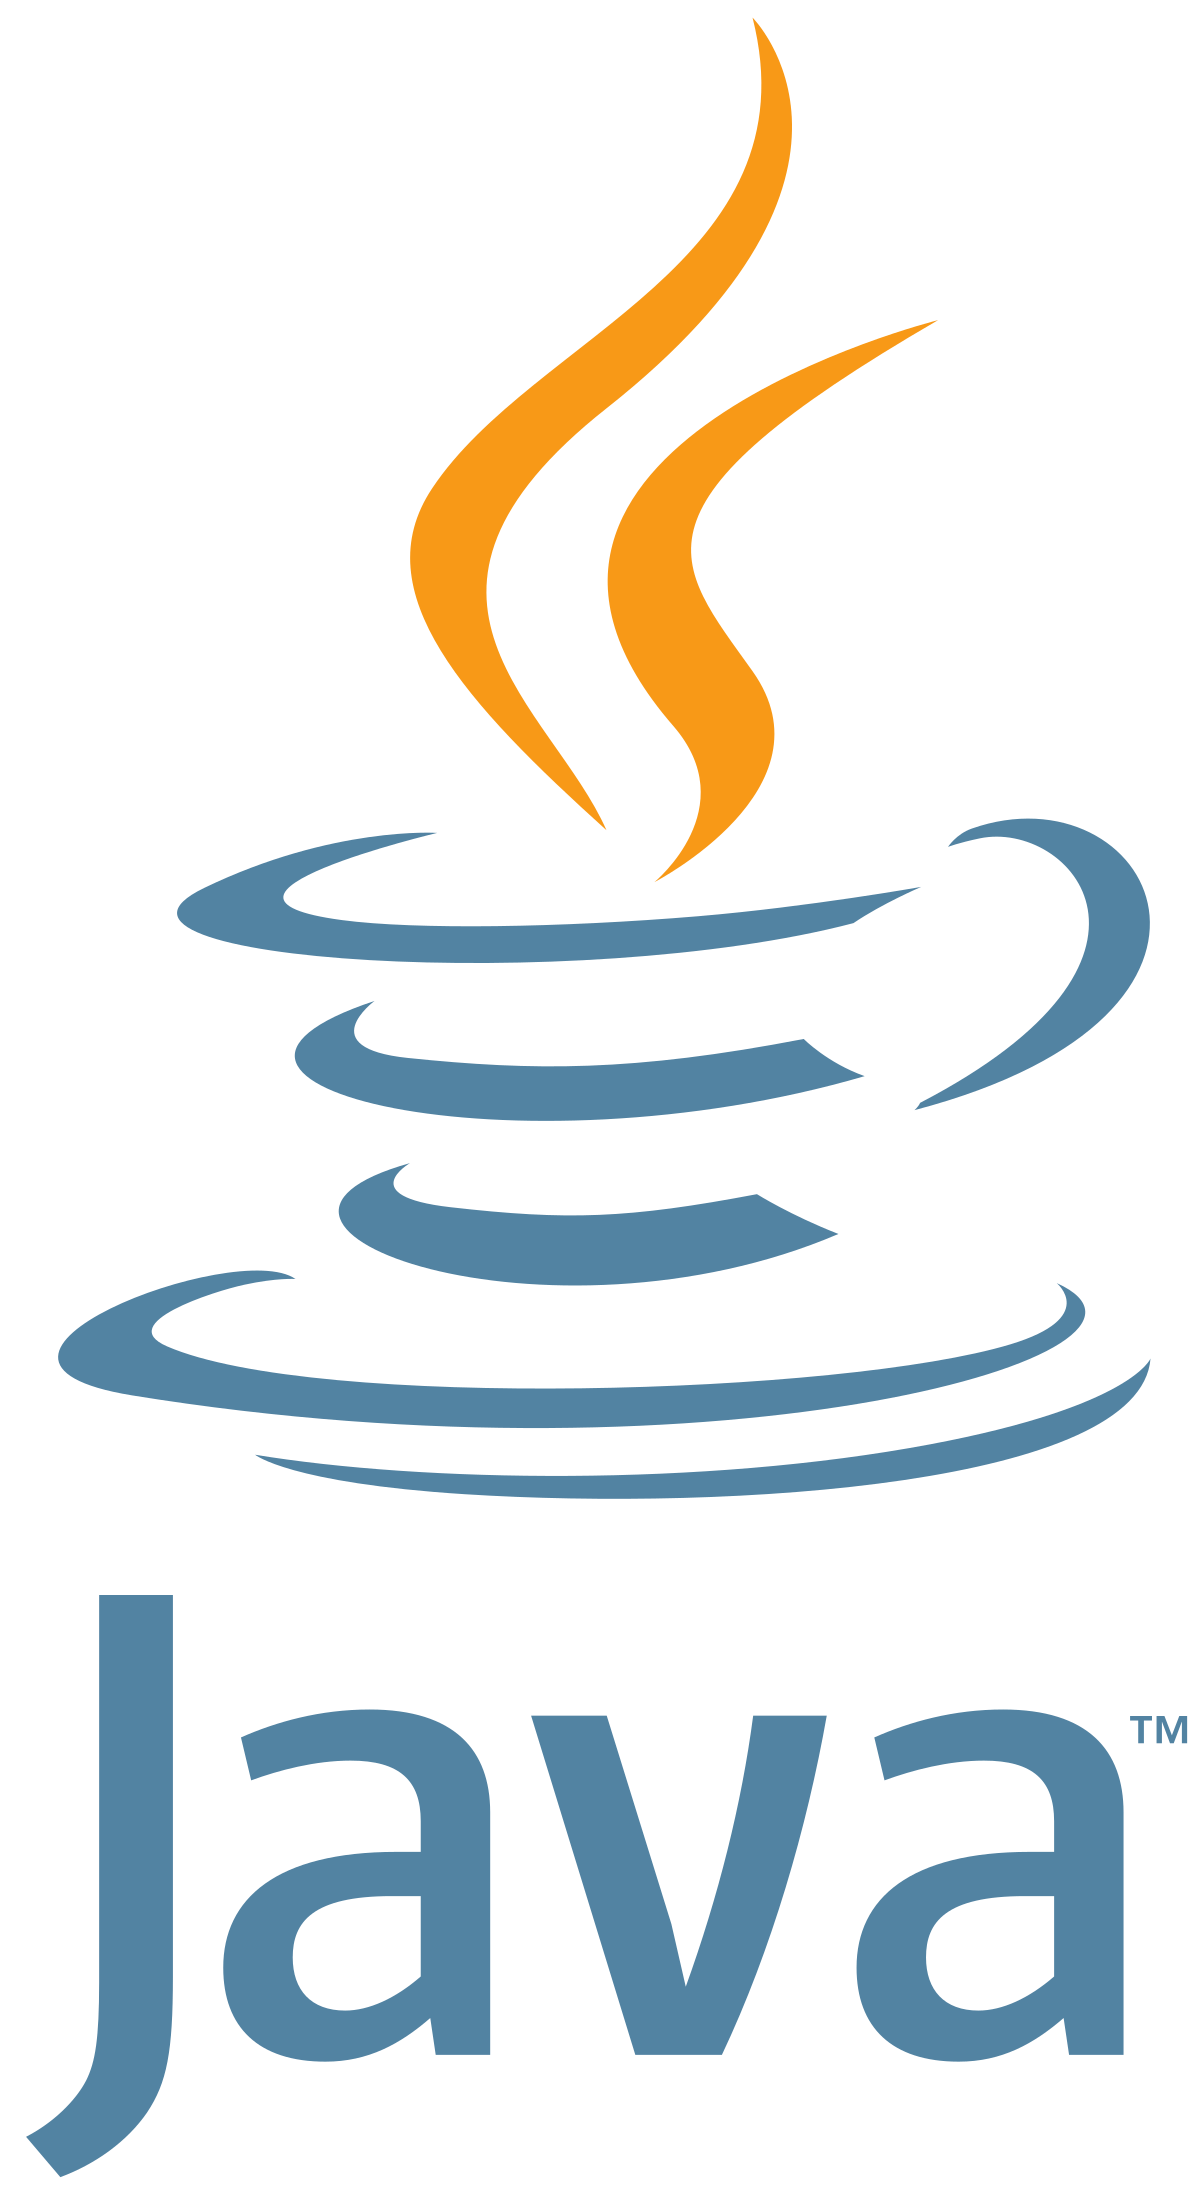 How To Start Learning Java